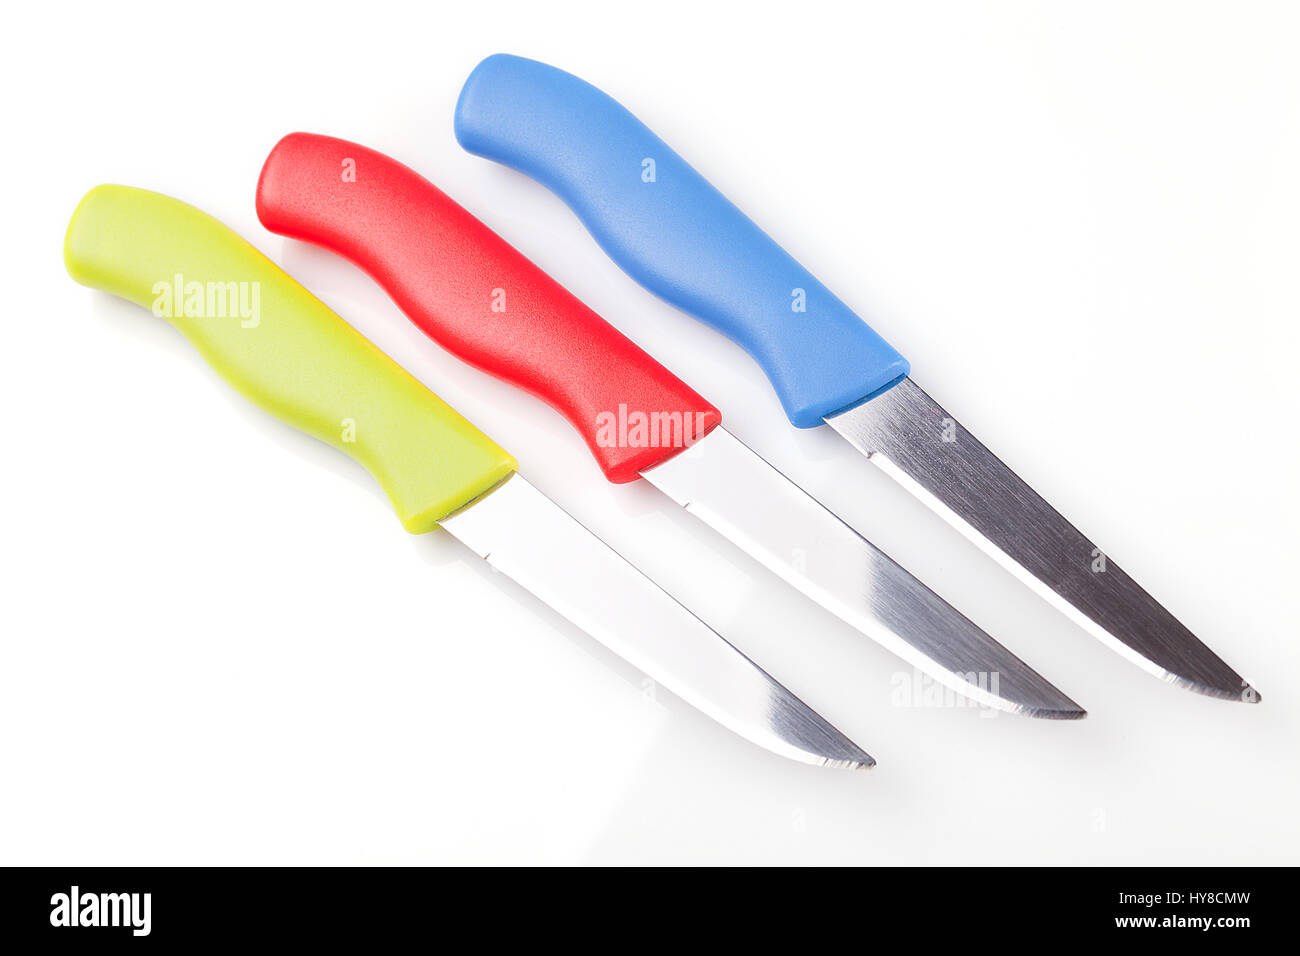 Set of colorful kitchen knives on a white surface. Kitchen tools isolated on white background. Stock Photo